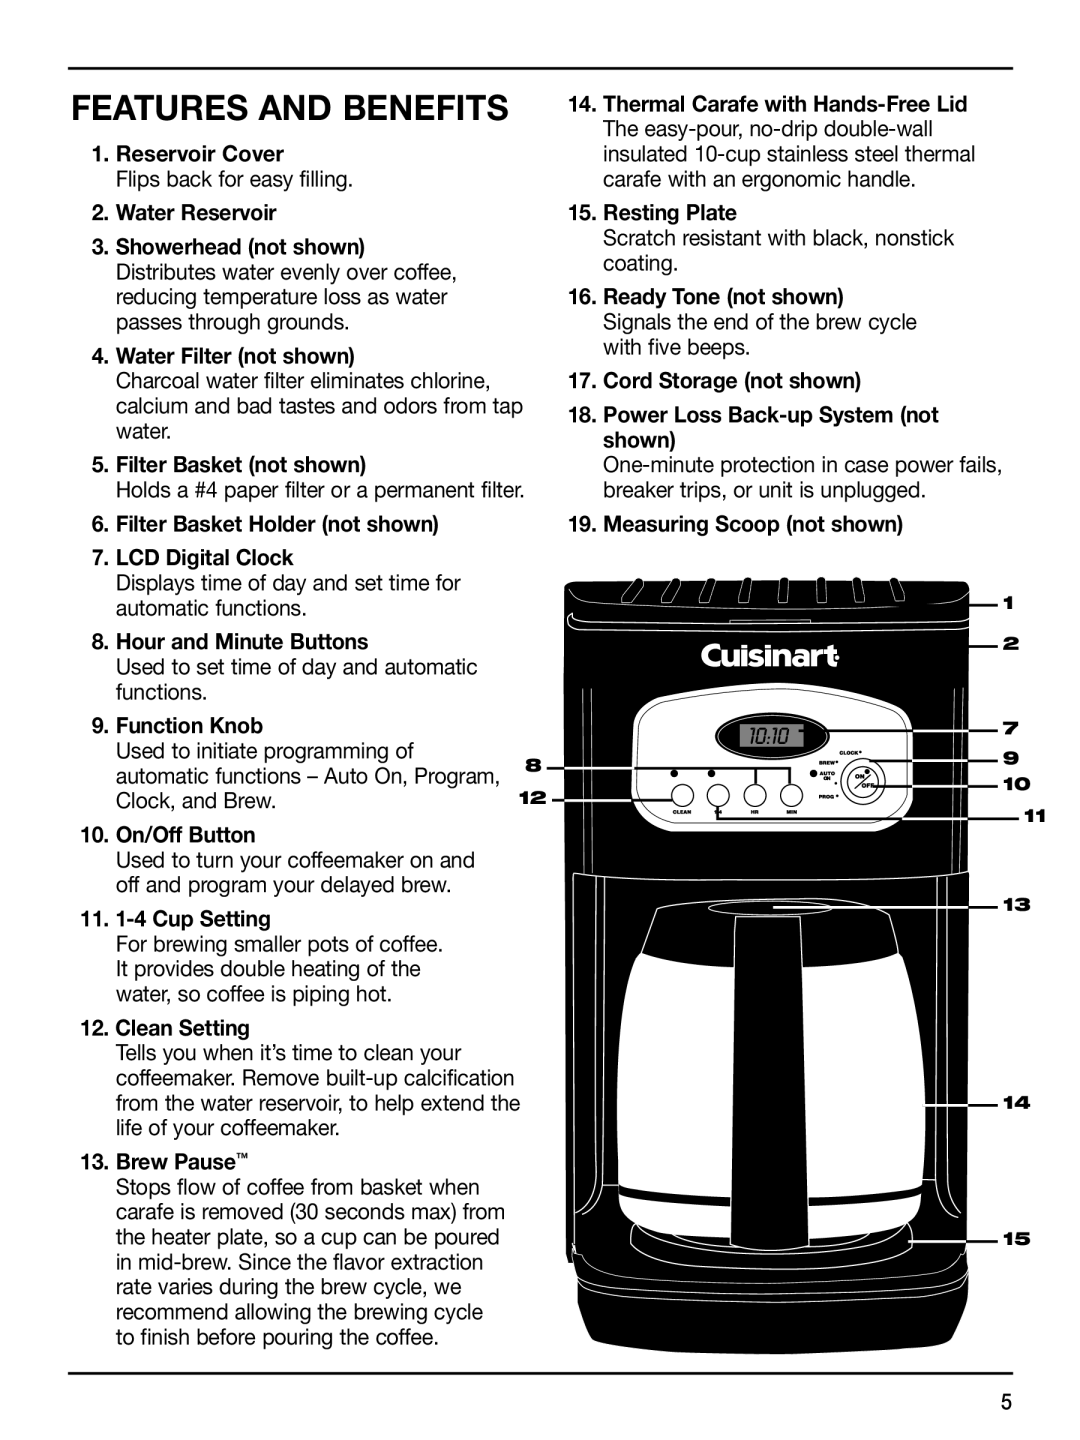 Cuisinart DCC-1150, IB-7294 FEATURES AND Benefits, Reservoir Cover, Water Reservoir, Water Filter not shown, Function Knob 